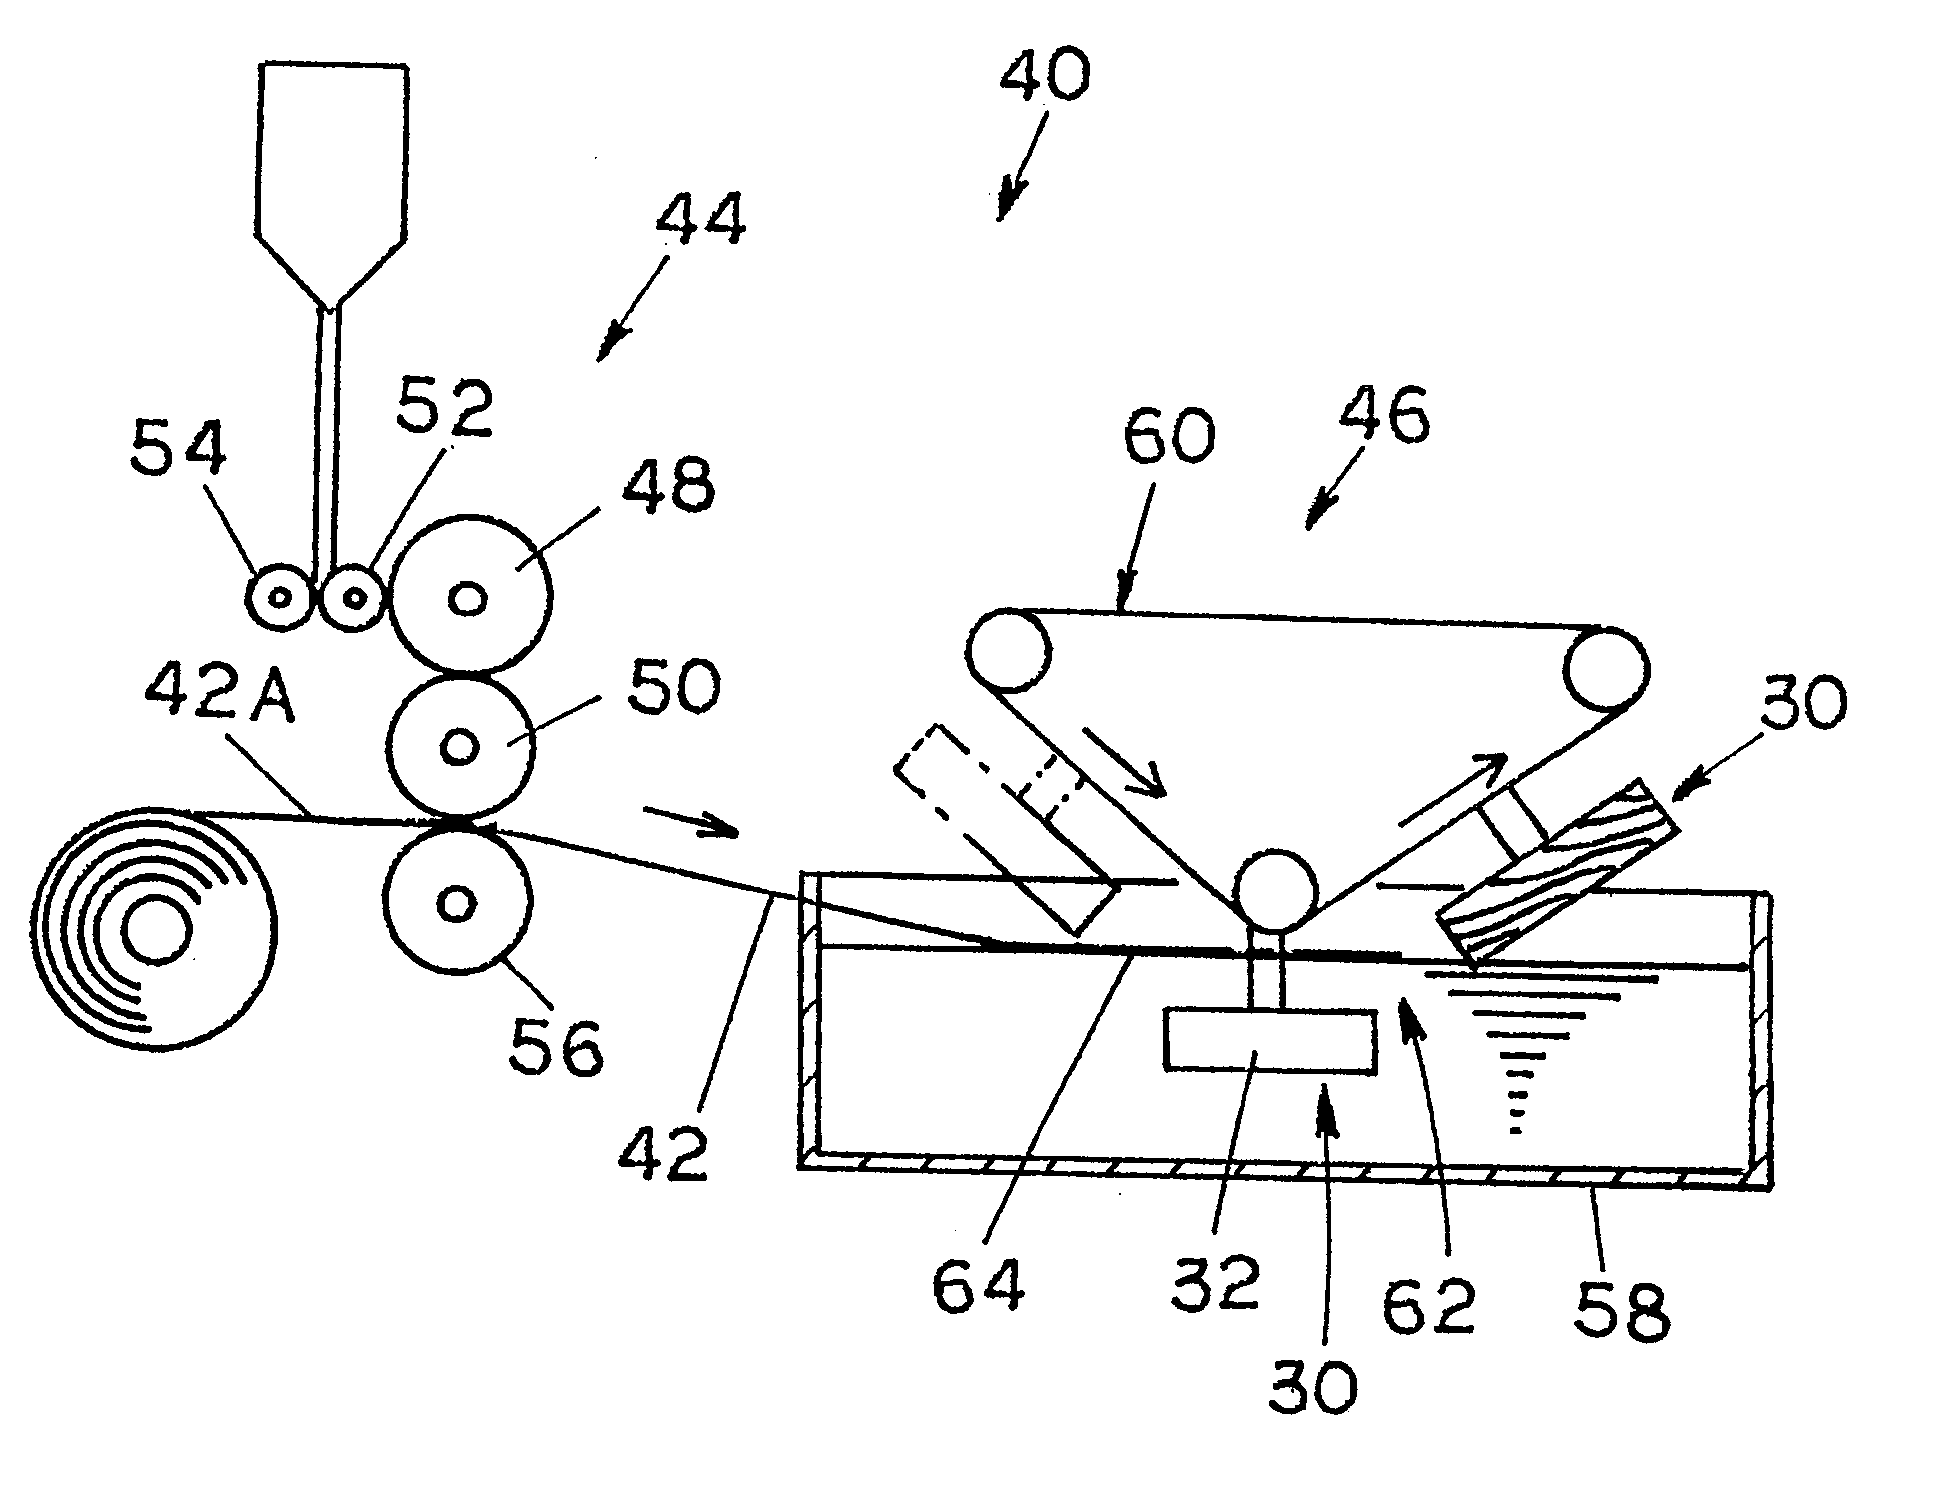 Method of transferring a print pattern composed of a fluoropolymer resin and an inorganic pigment onto an objective body using liquid pressure